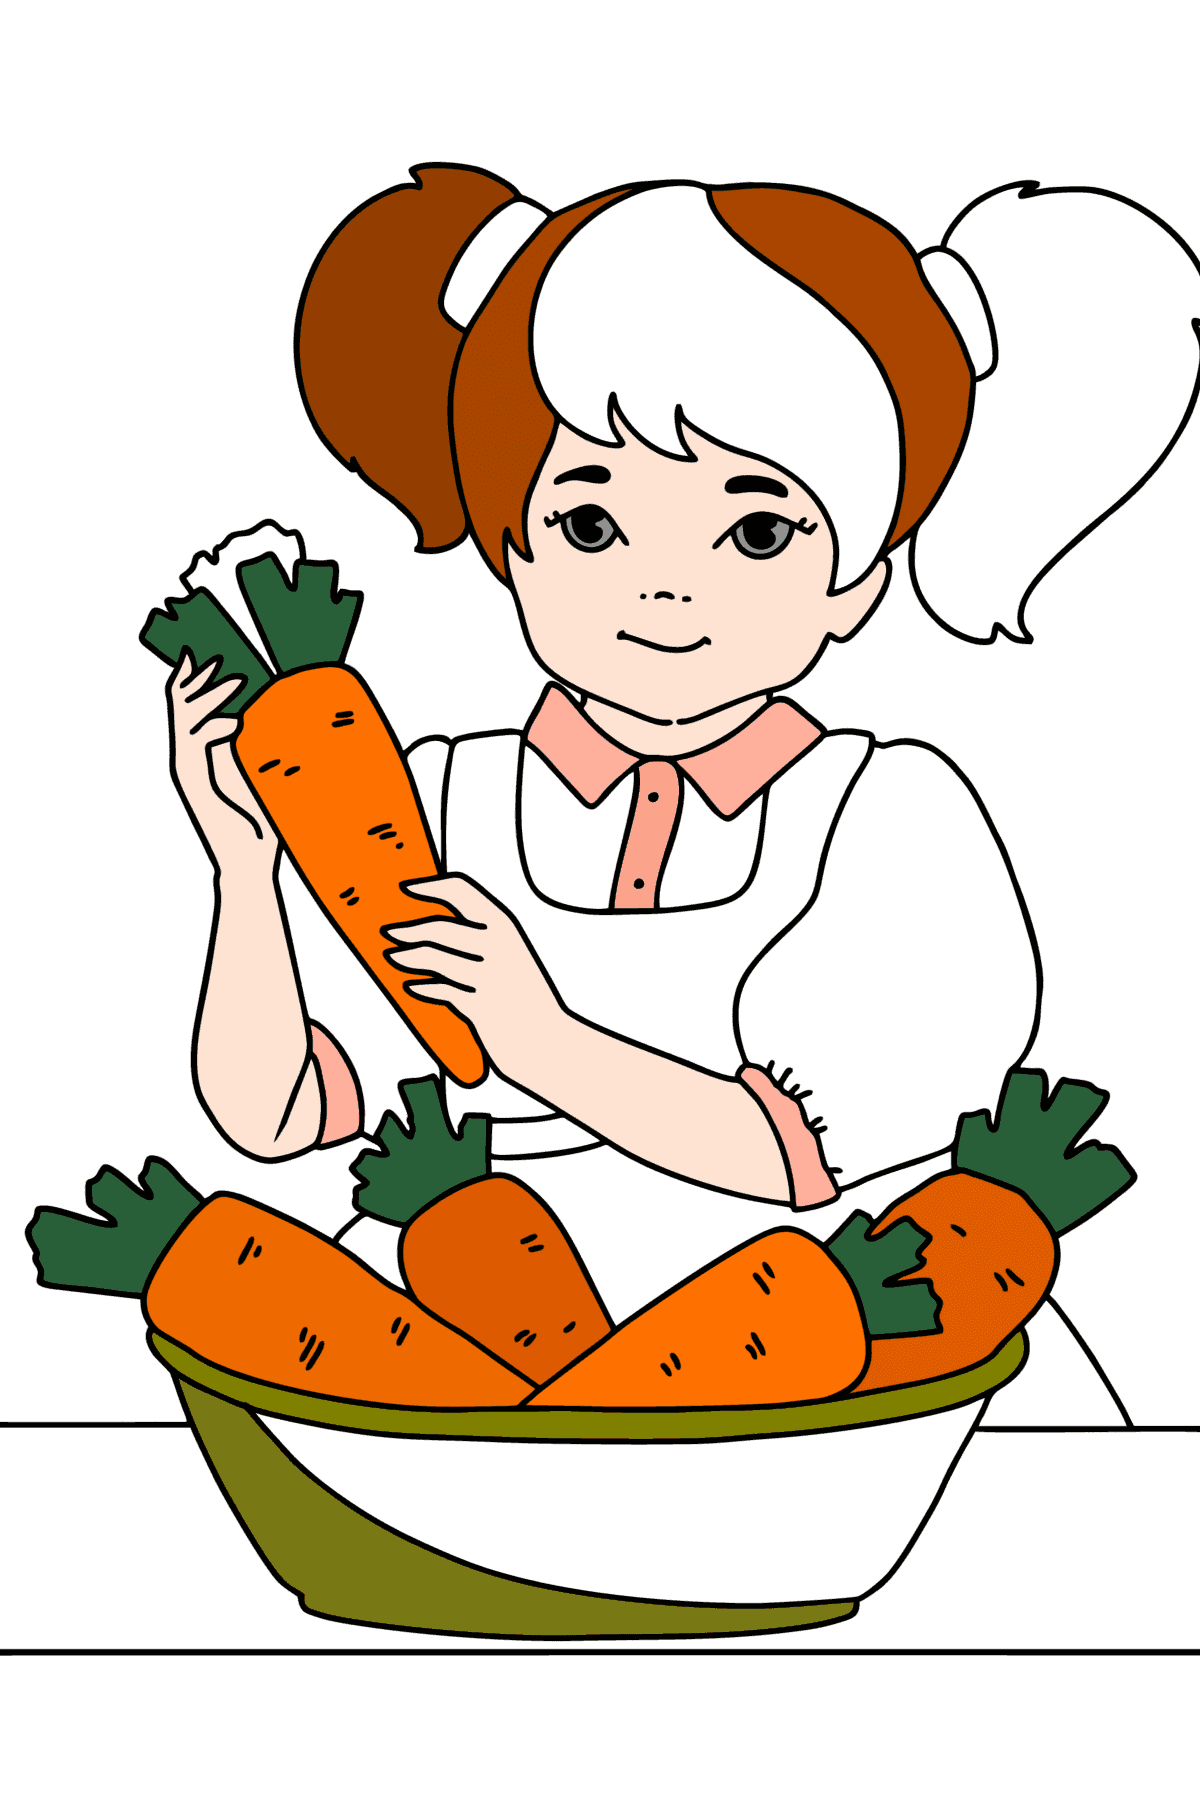 Girl in the kitchen сoloring page - Coloring Pages for Kids